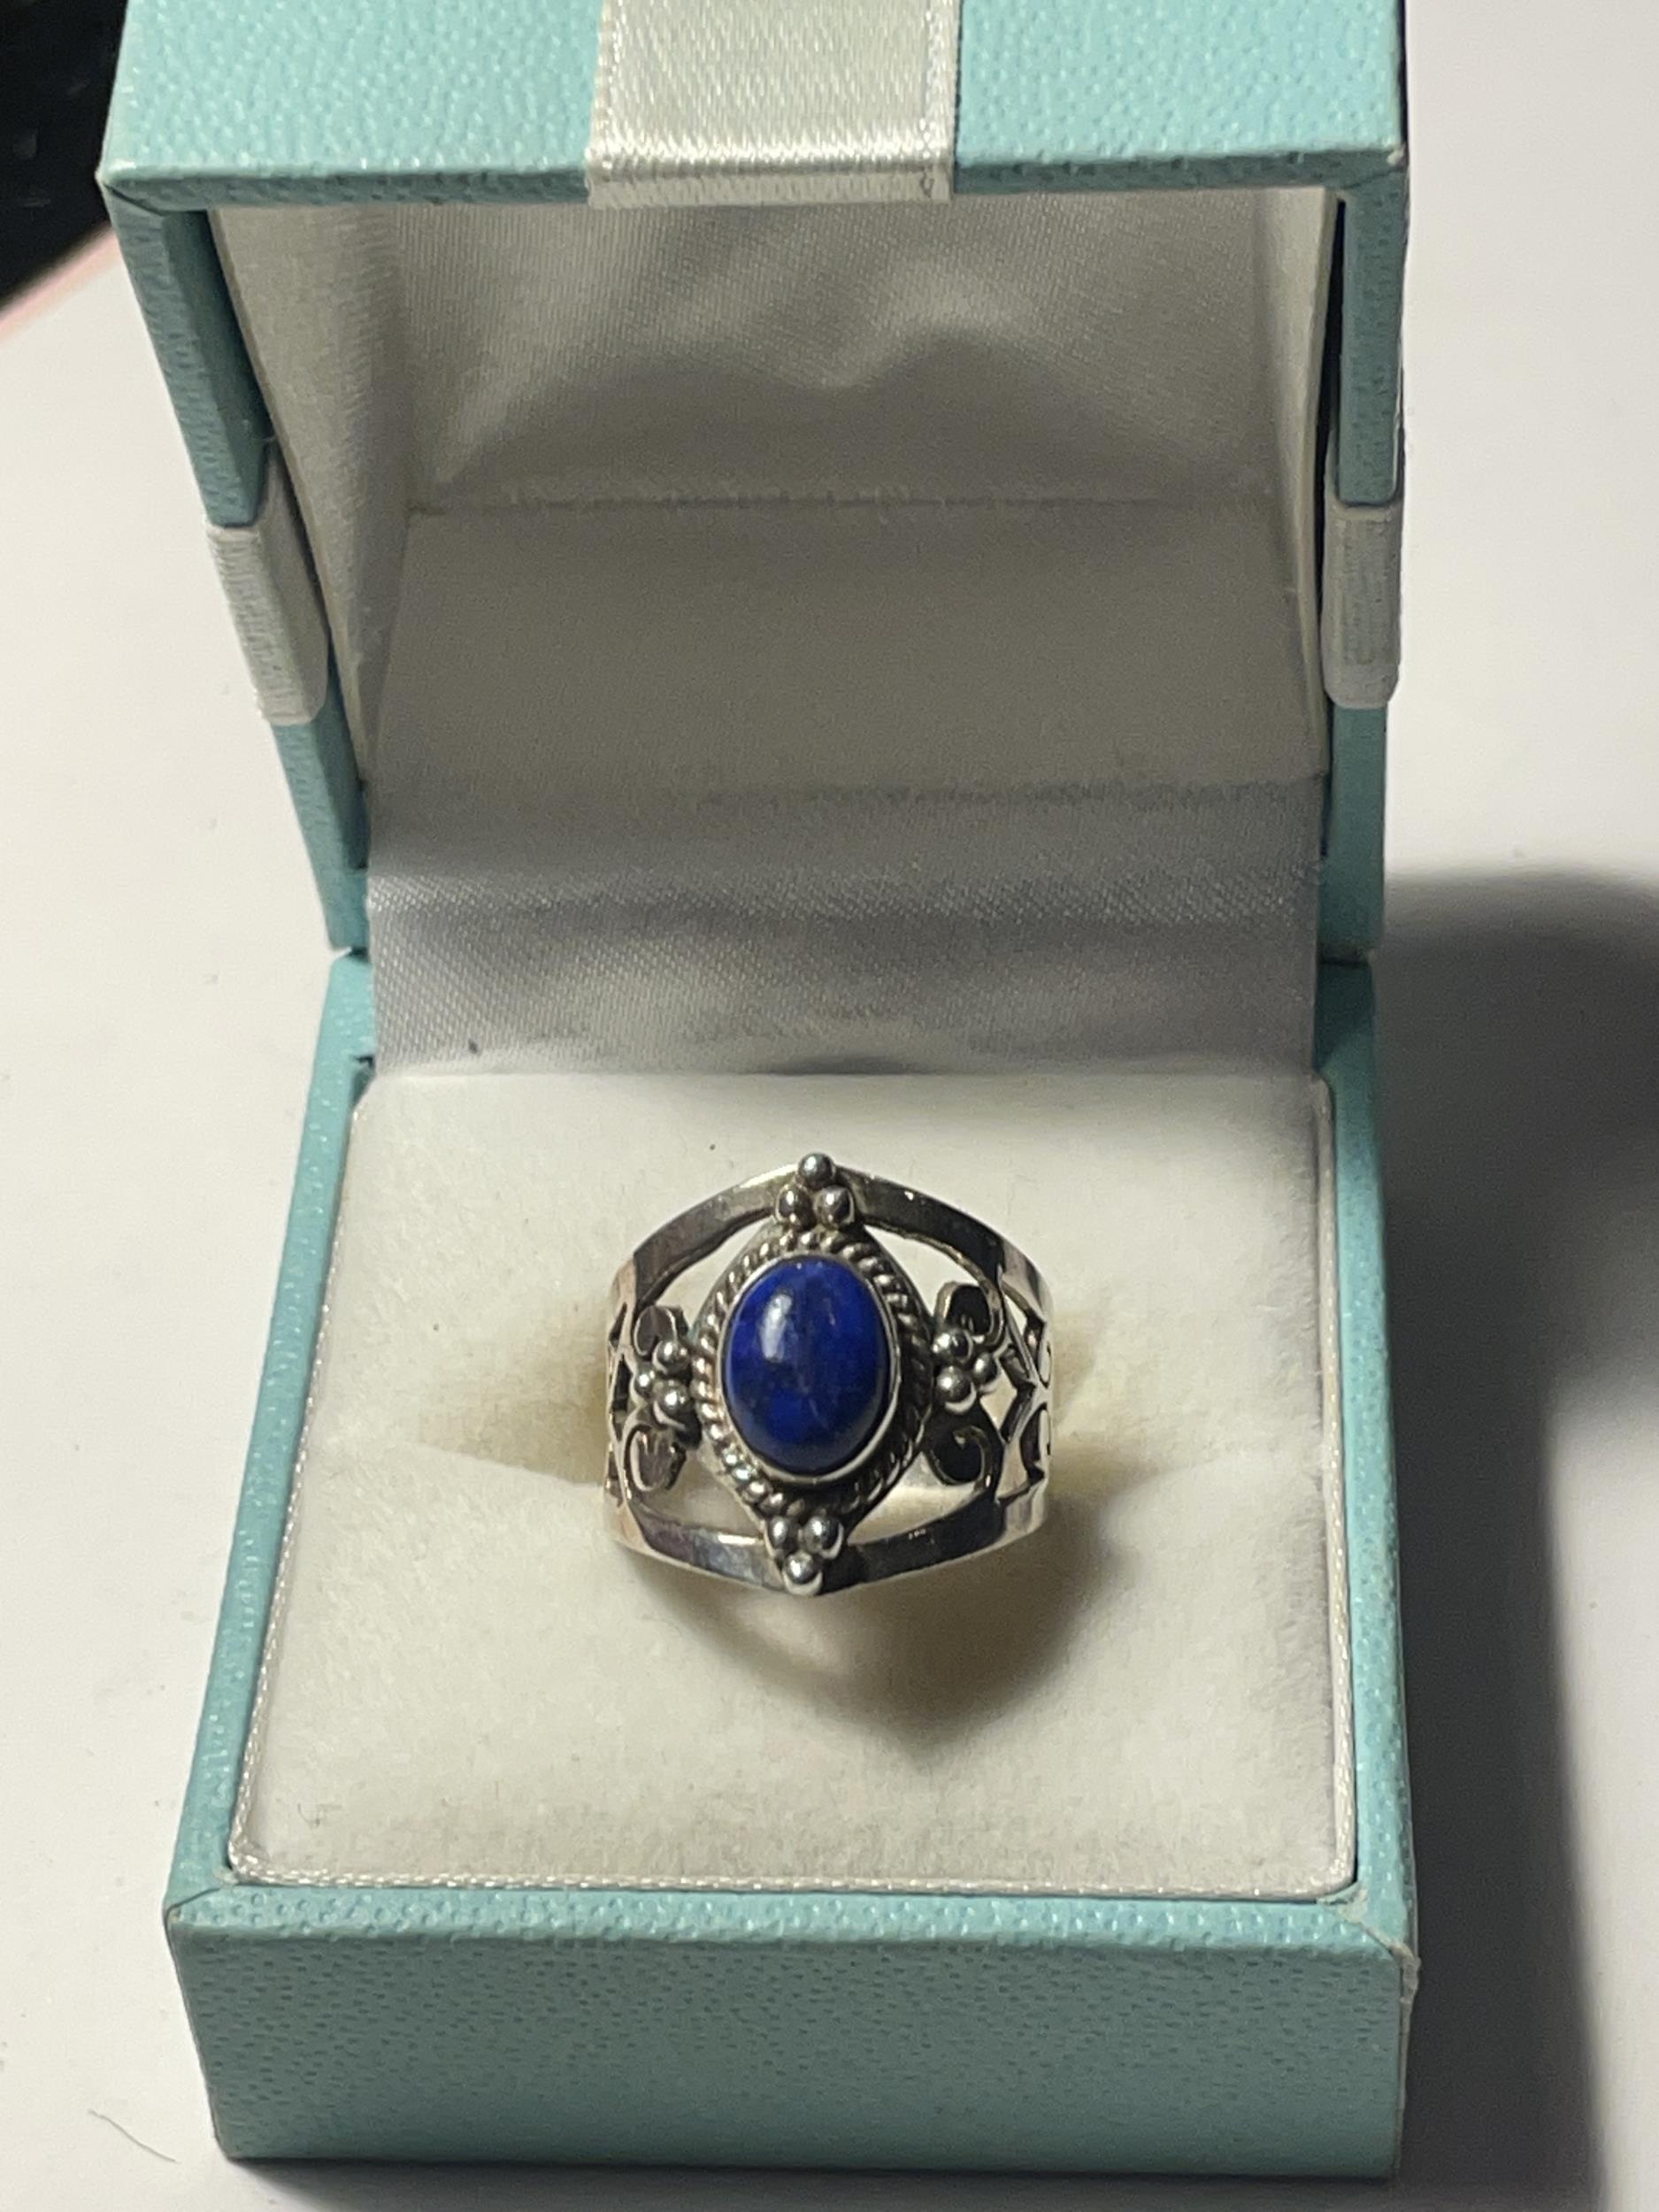 A SILVER DRESS RING WITH A BLUE CENTRE STONE IN A PRESENTATION BOX